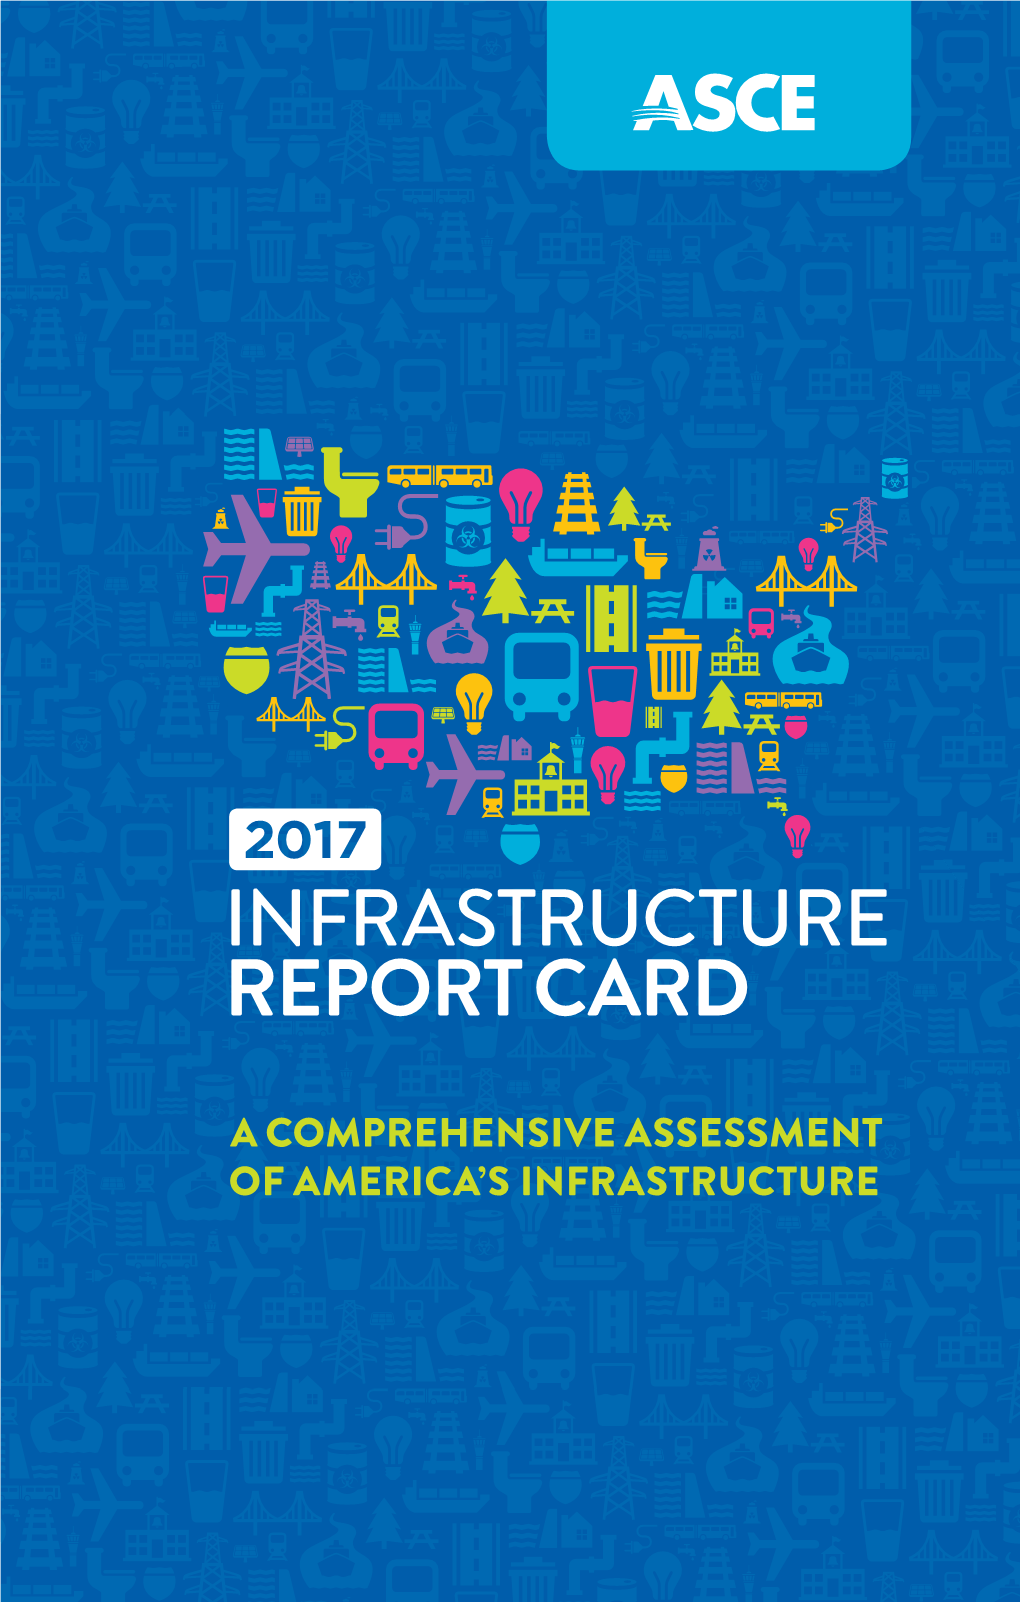 A Comprehensive Assessment of America's Infrastructure